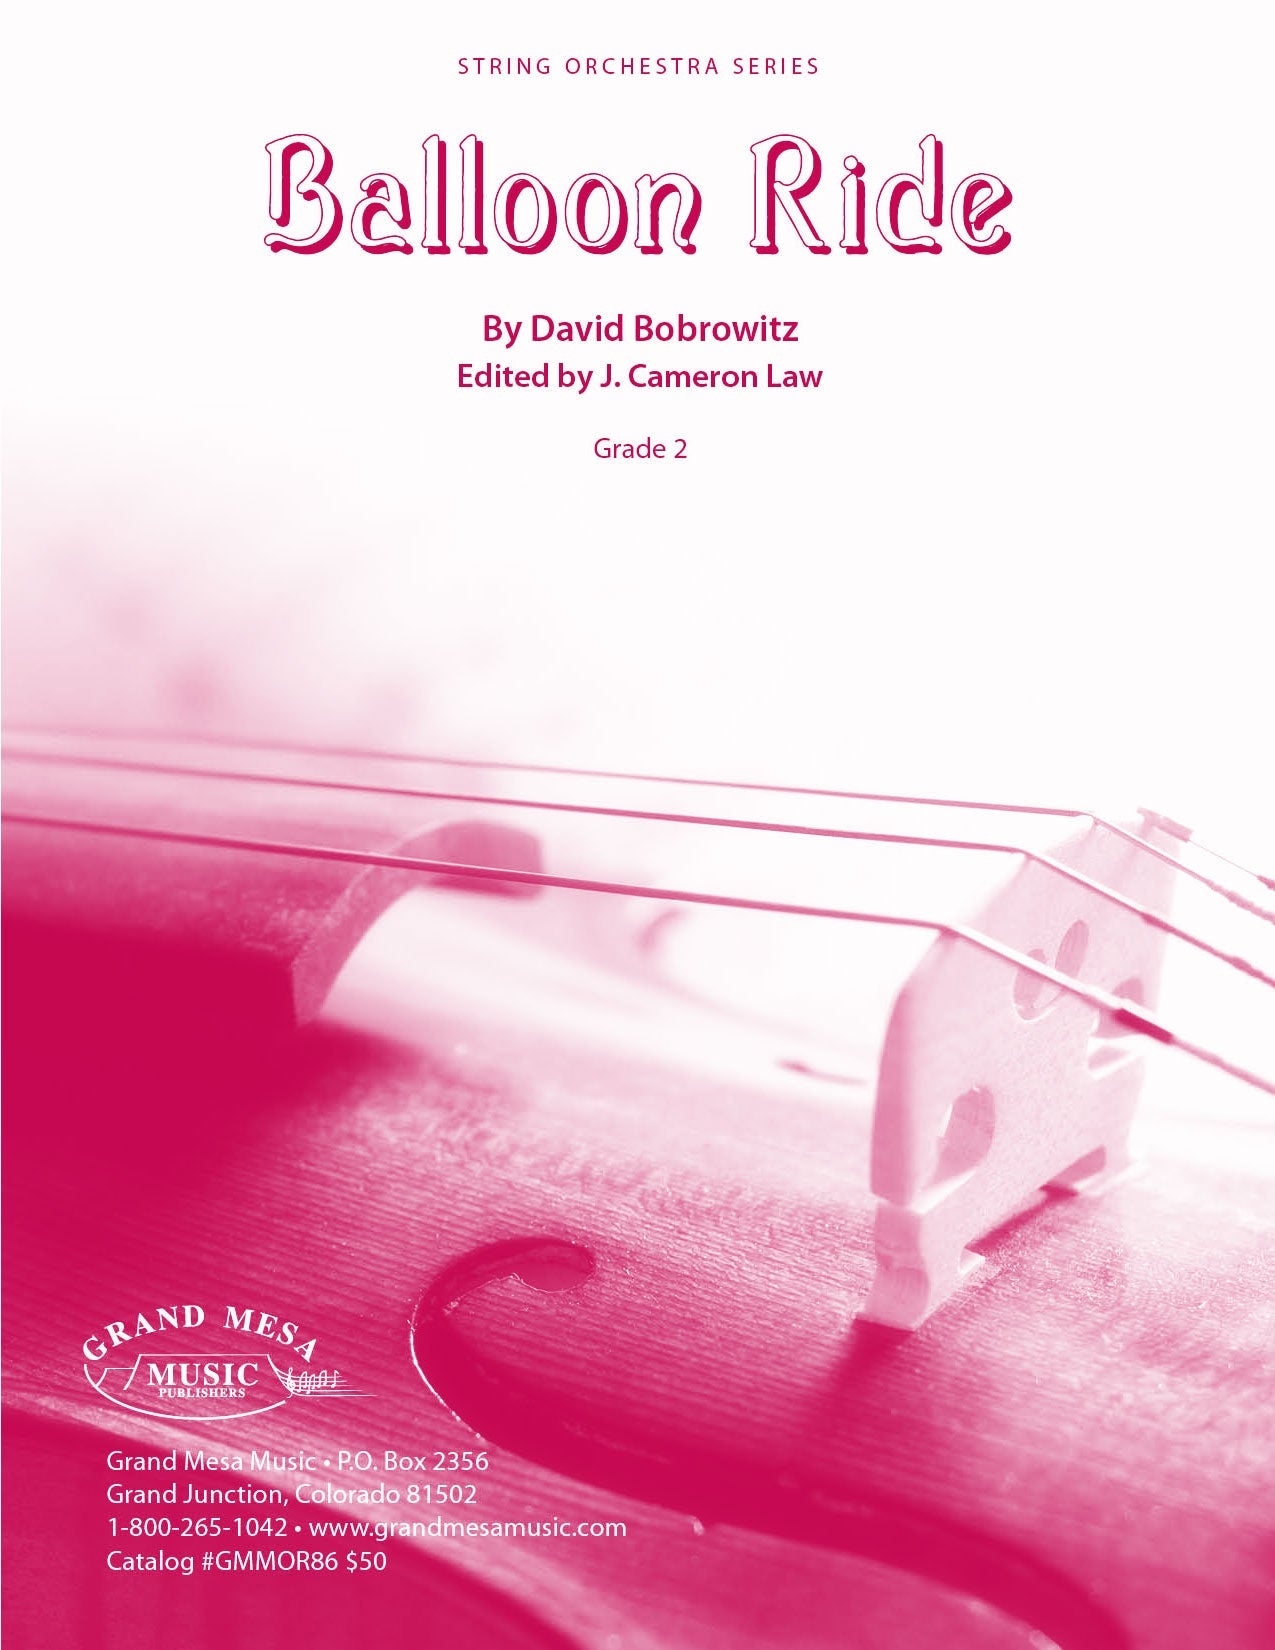 Strings sheet music cover of Balloon Ride, composed by David Bobrowitz.